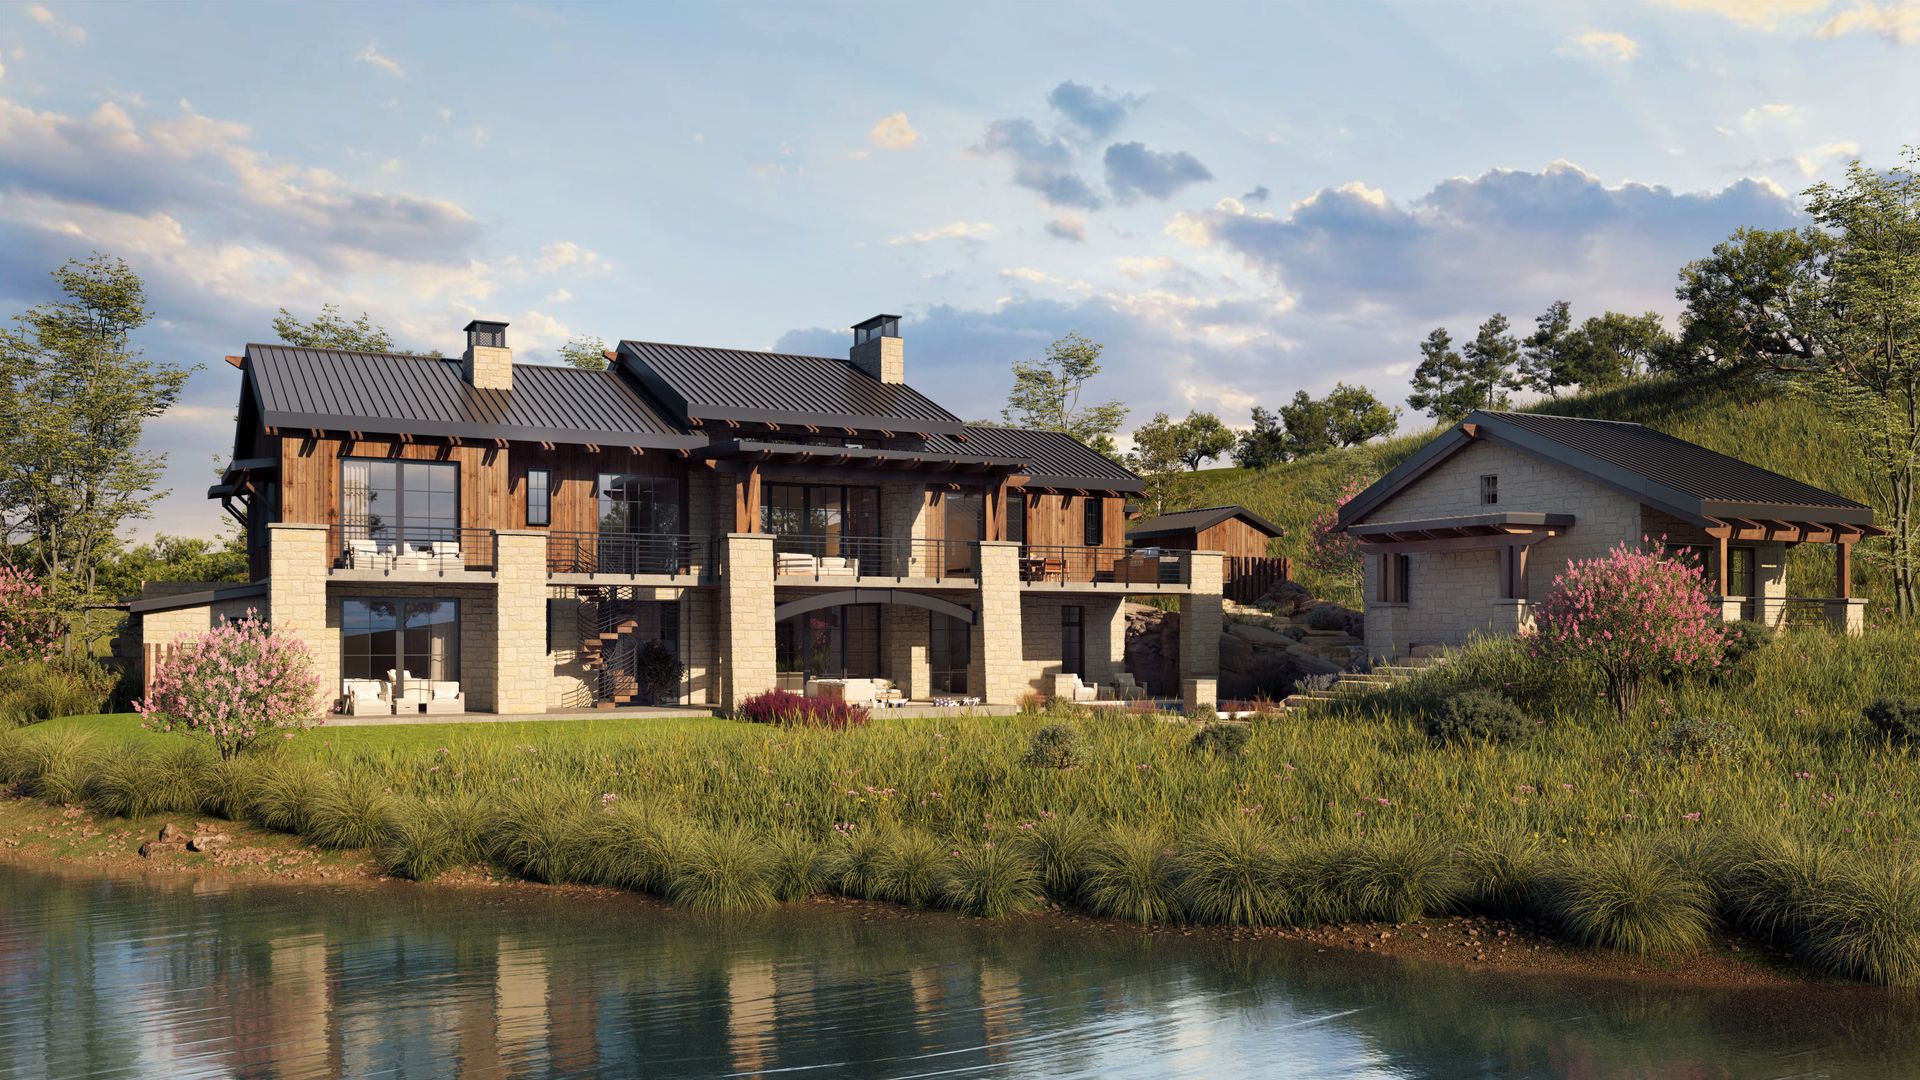 Artist's rendering of back of Lake House 1. Image is conceptual and subject to change.